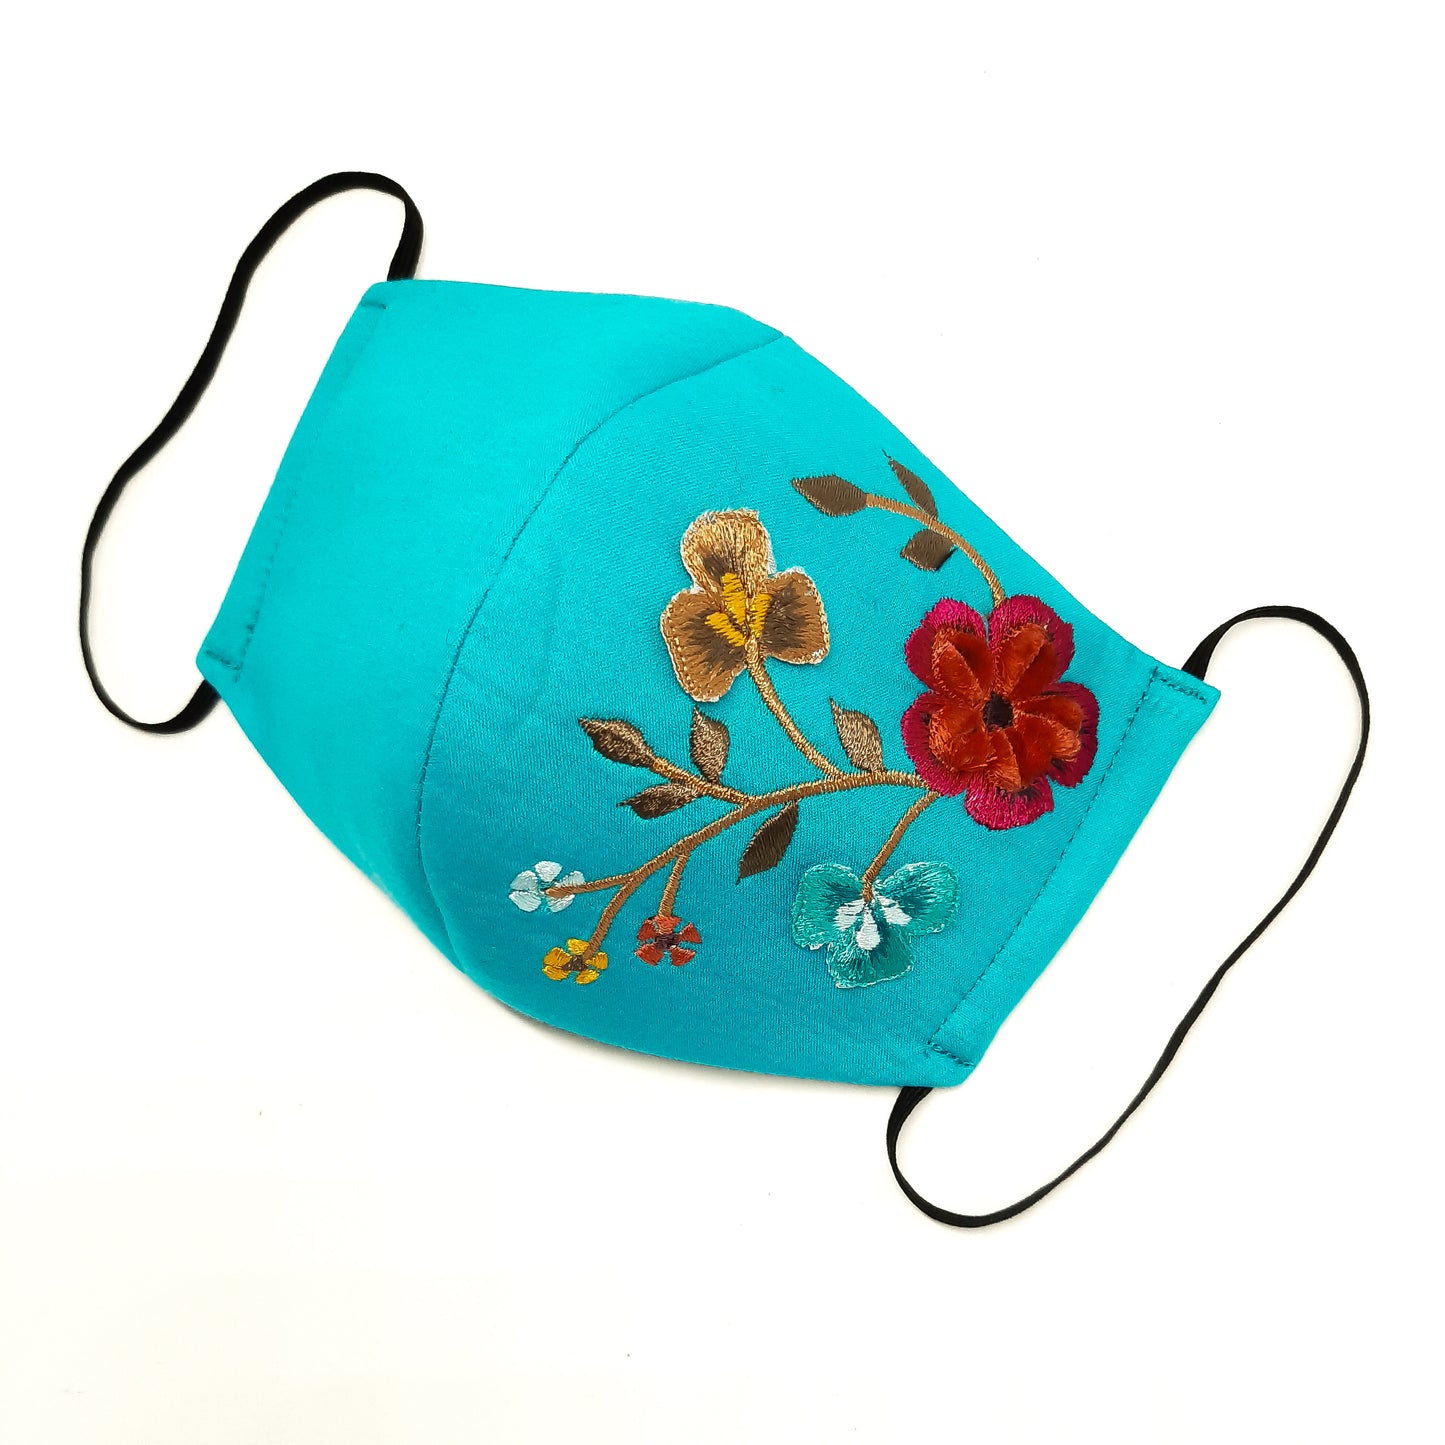 Turquoise Toska 3D Facemask